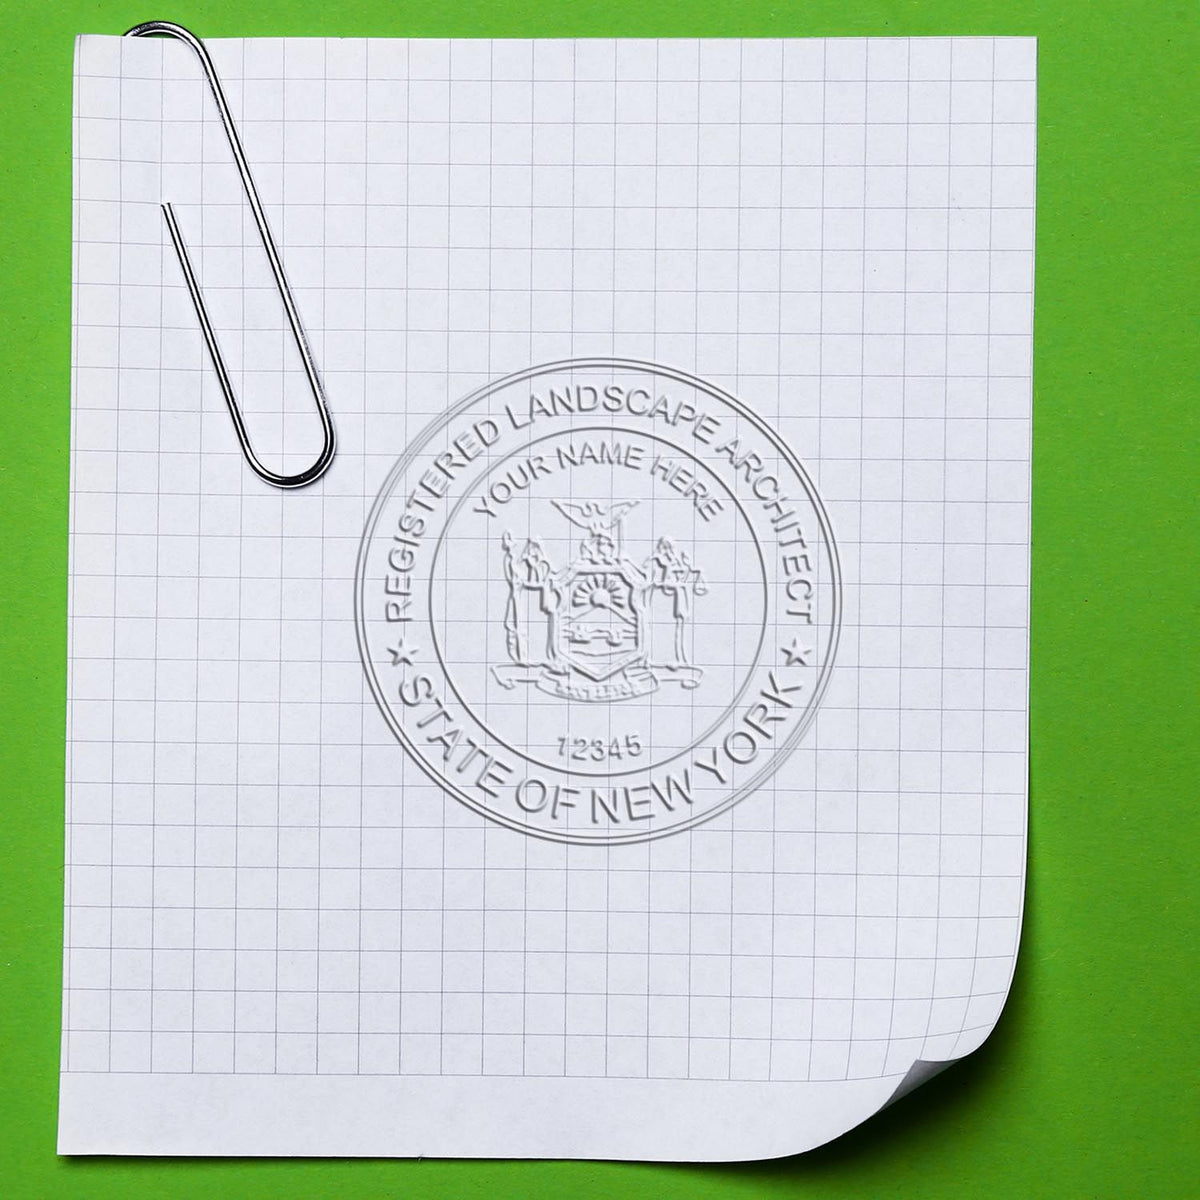 An alternative view of the Hybrid New York Landscape Architect Seal stamped on a sheet of paper showing the image in use